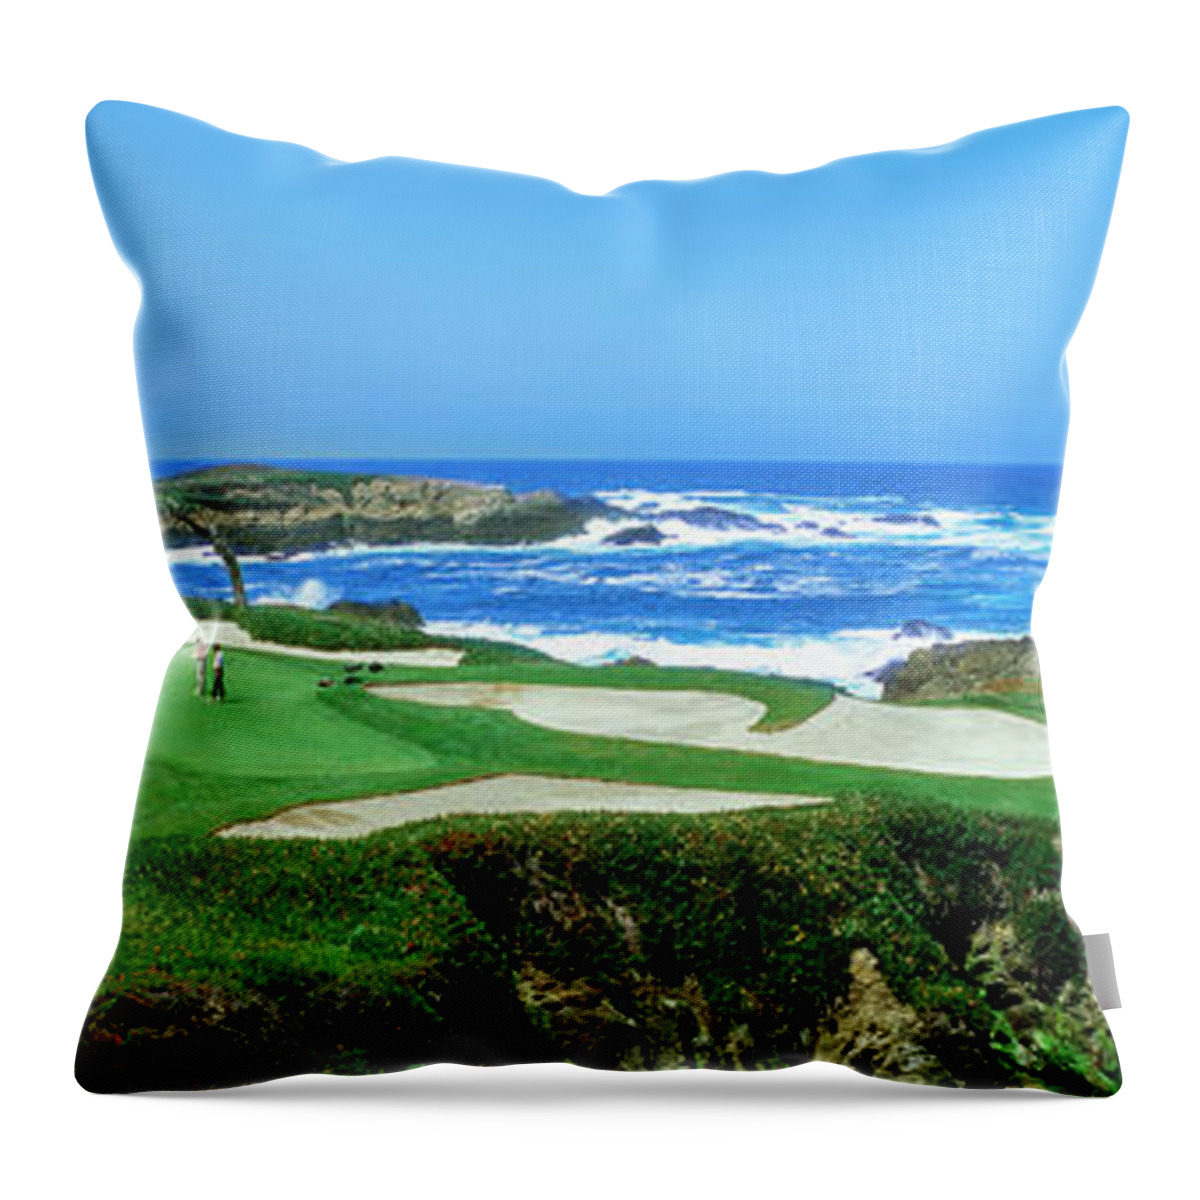 Photography Throw Pillow featuring the photograph Cypress Point Golf Course Pebble Beach by Panoramic Images